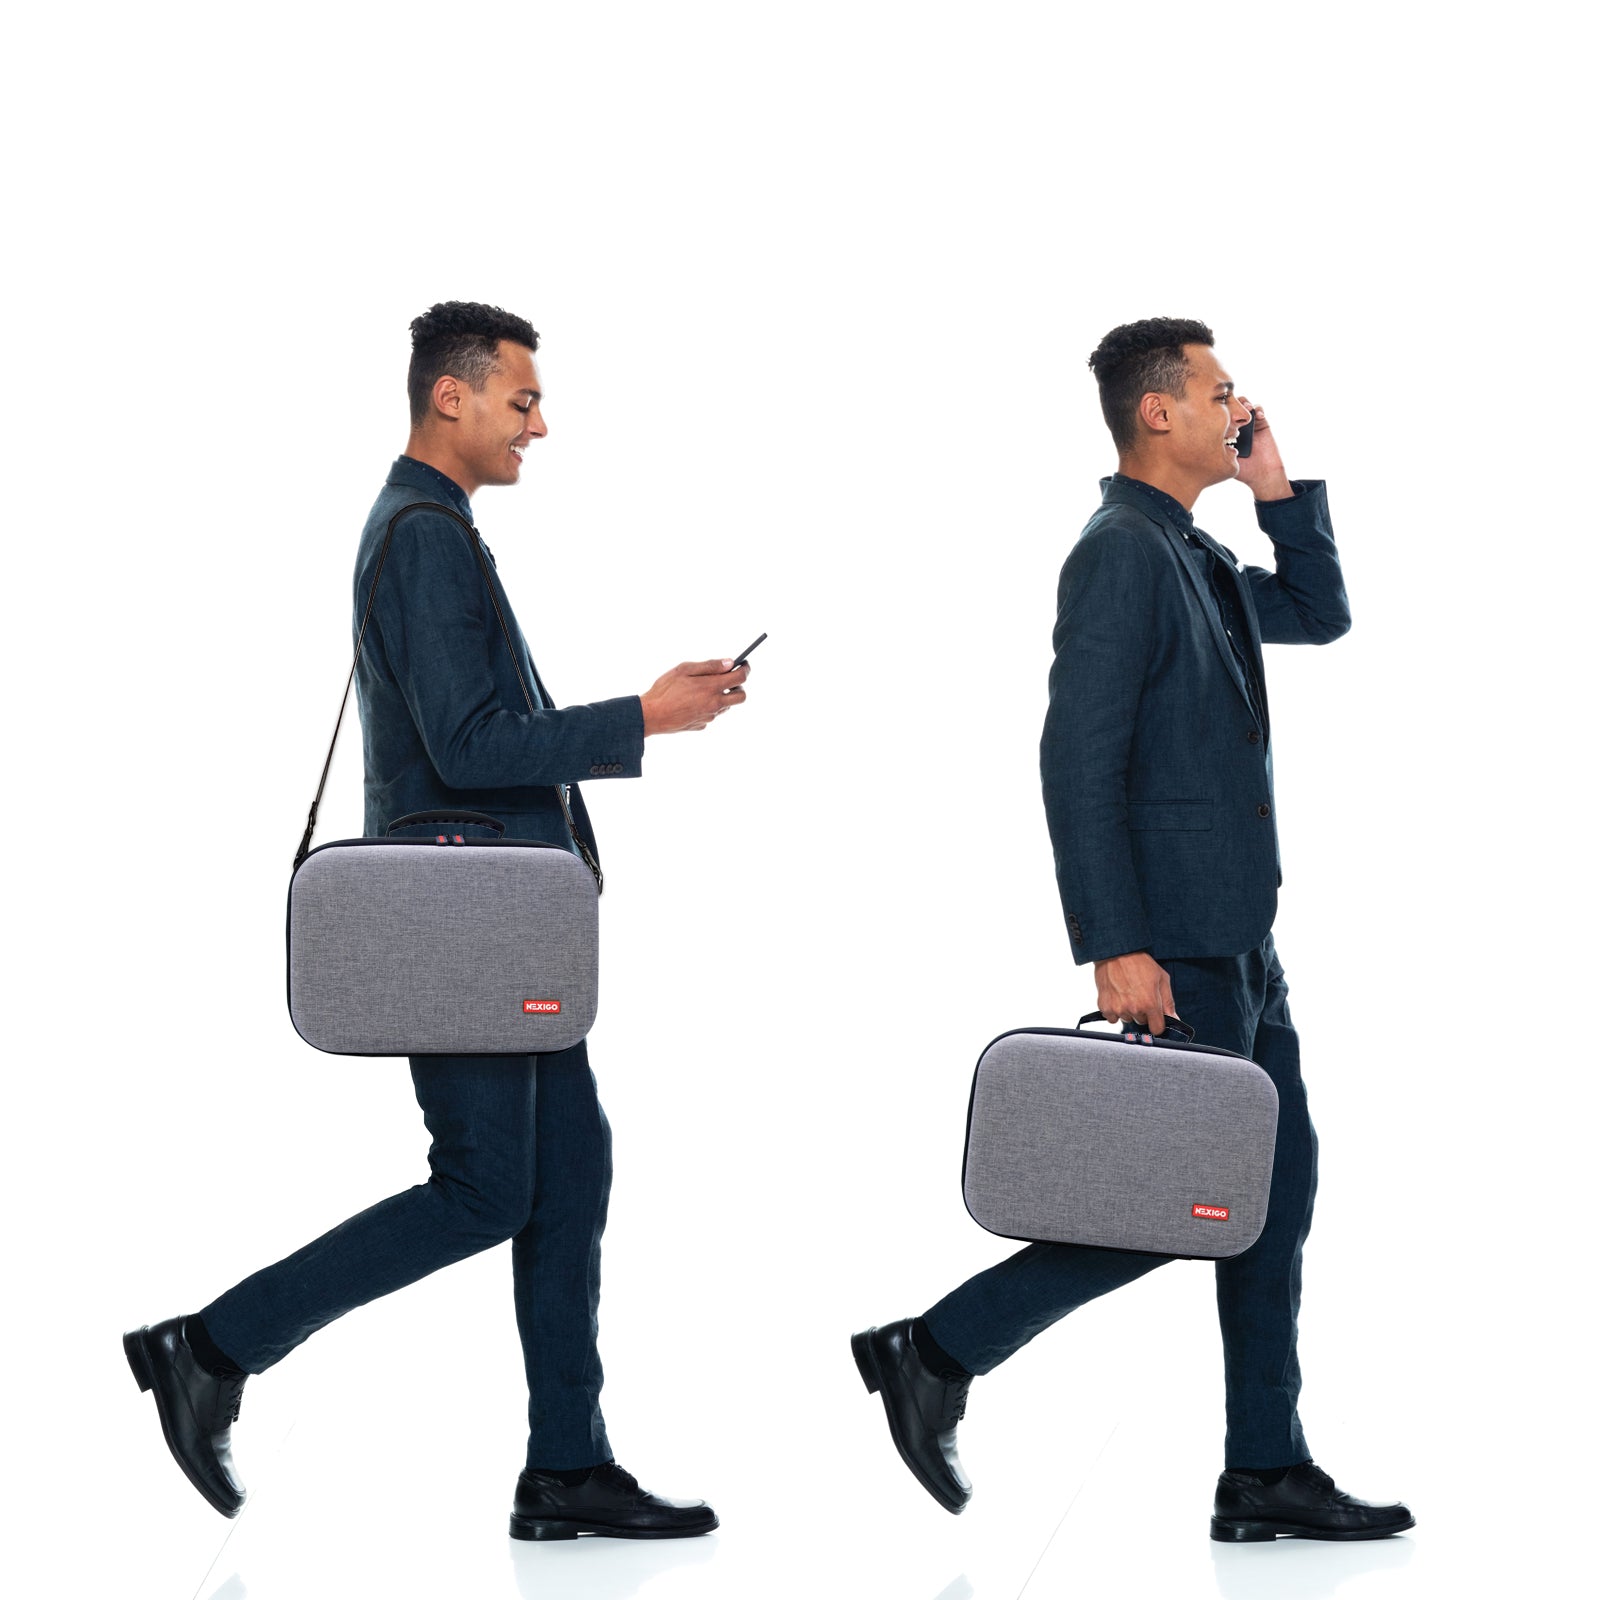 One person carries the carrying case on their shoulder, while the other holds it in their hand. 